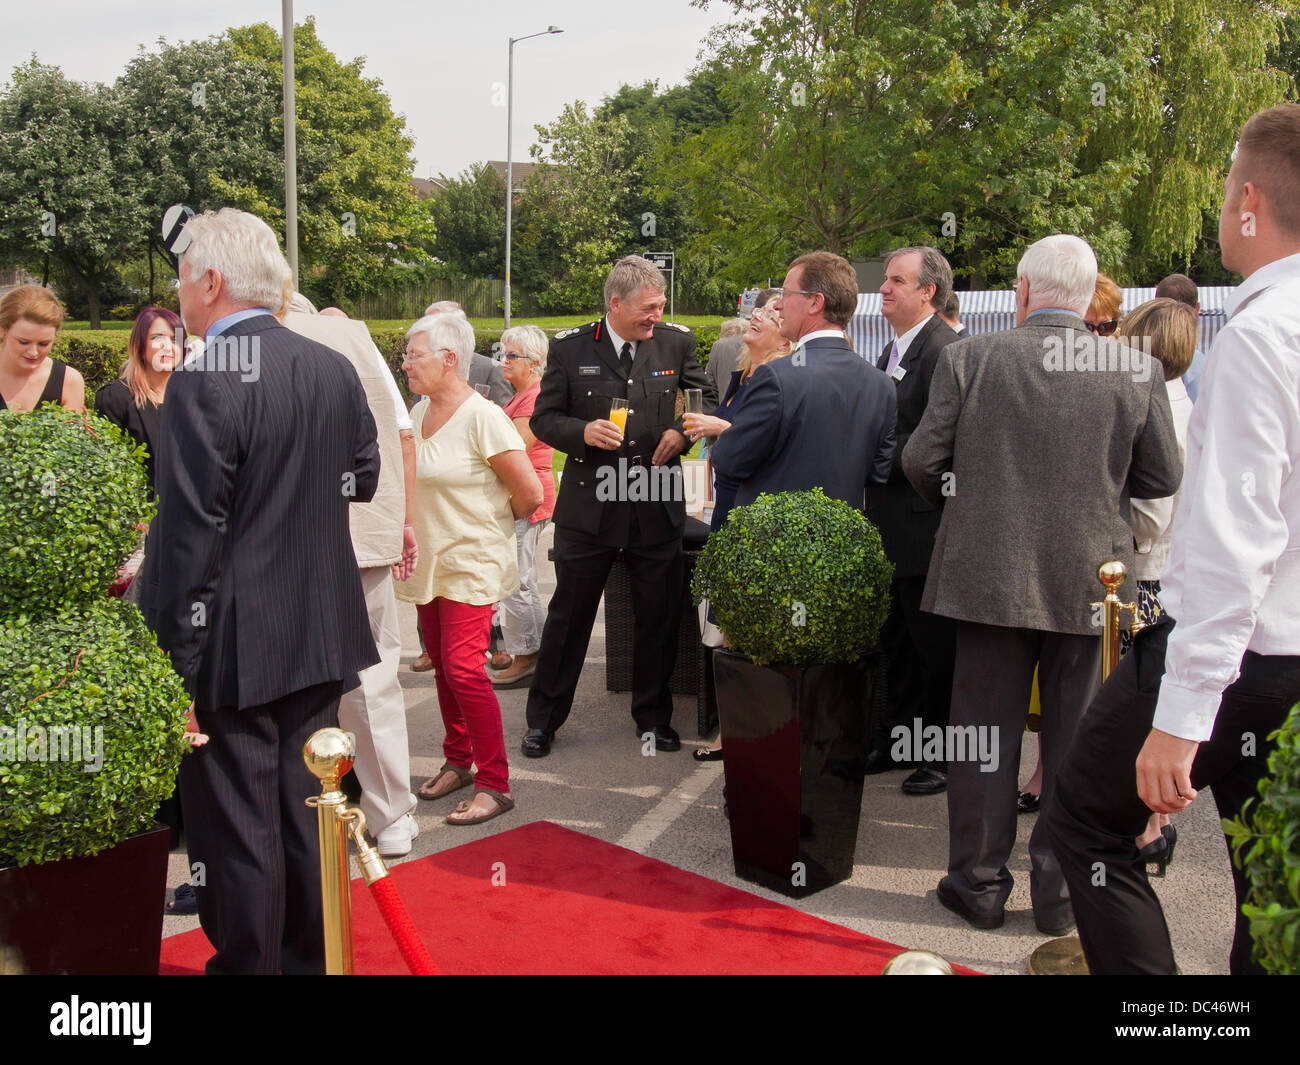 Leyland, Lancashire, UK 8th August 2013. Guests arriving for the the unveiling of the last surviving 1938 Leyland TL Fire Engine as part of the Leyland Gateway Project. © Sue Burton/Alamy News Stock Photo